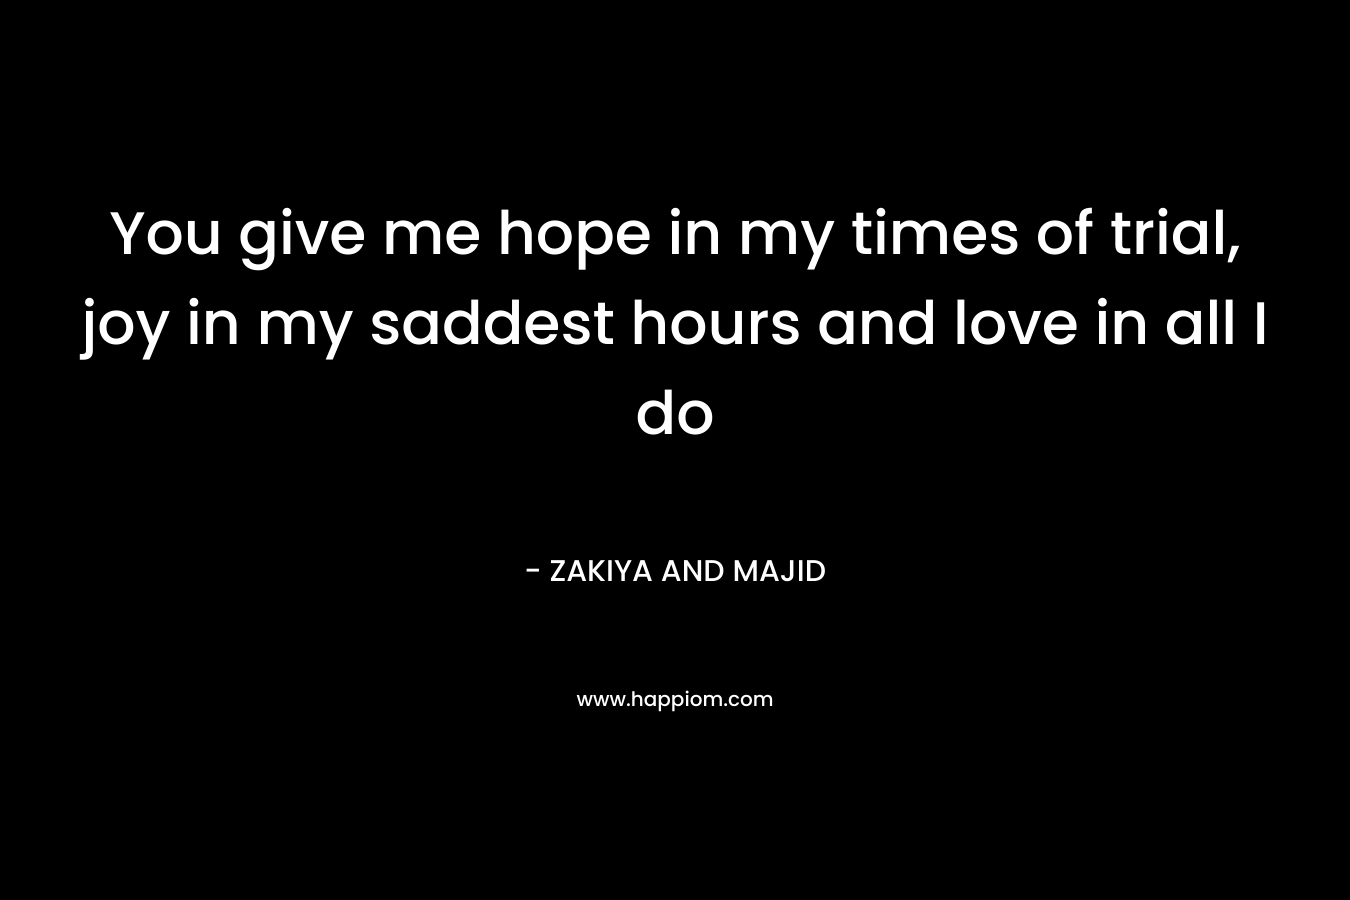 You give me hope in my times of trial, joy in my saddest hours and love in all I do – ZAKIYA AND MAJID